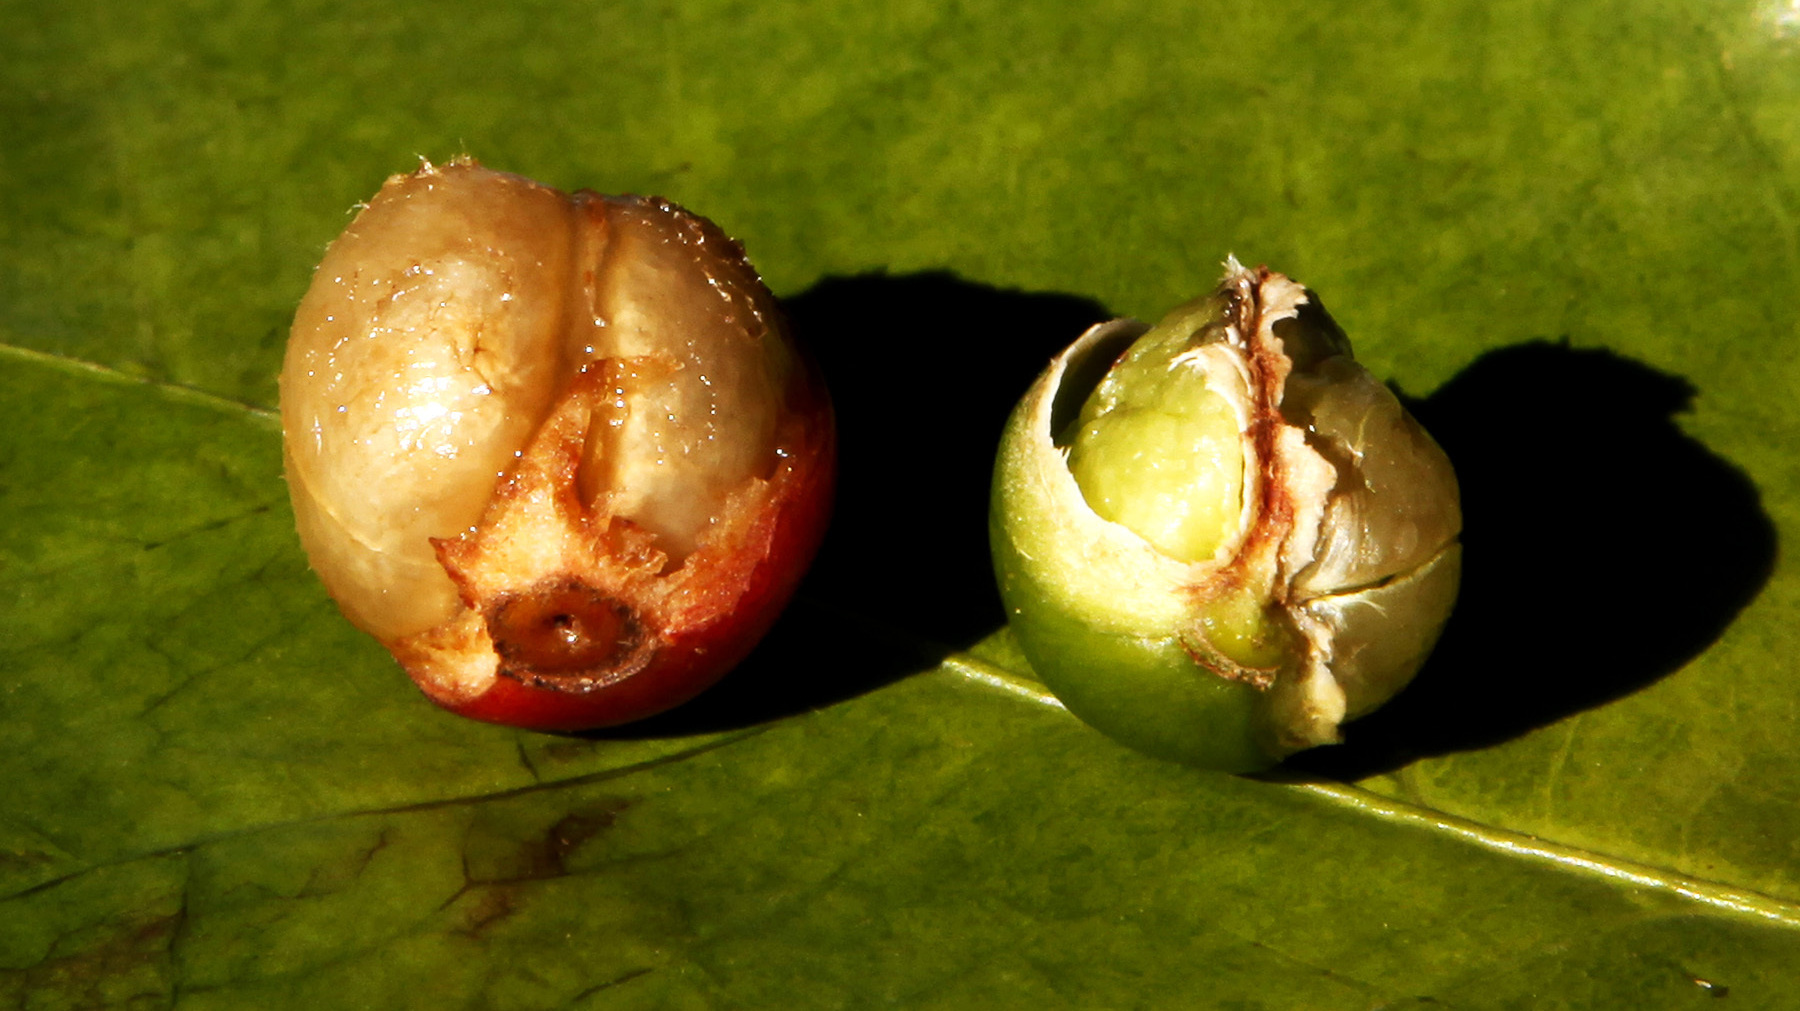 A fully formed coffee berry, left, is shown next to a damaged coffee berry due to drought, at a coffee farm in Santo Antonio do Jardim, Brazil on Feb. 6. Photo: Paulo Whitaker/Reuters/Landov